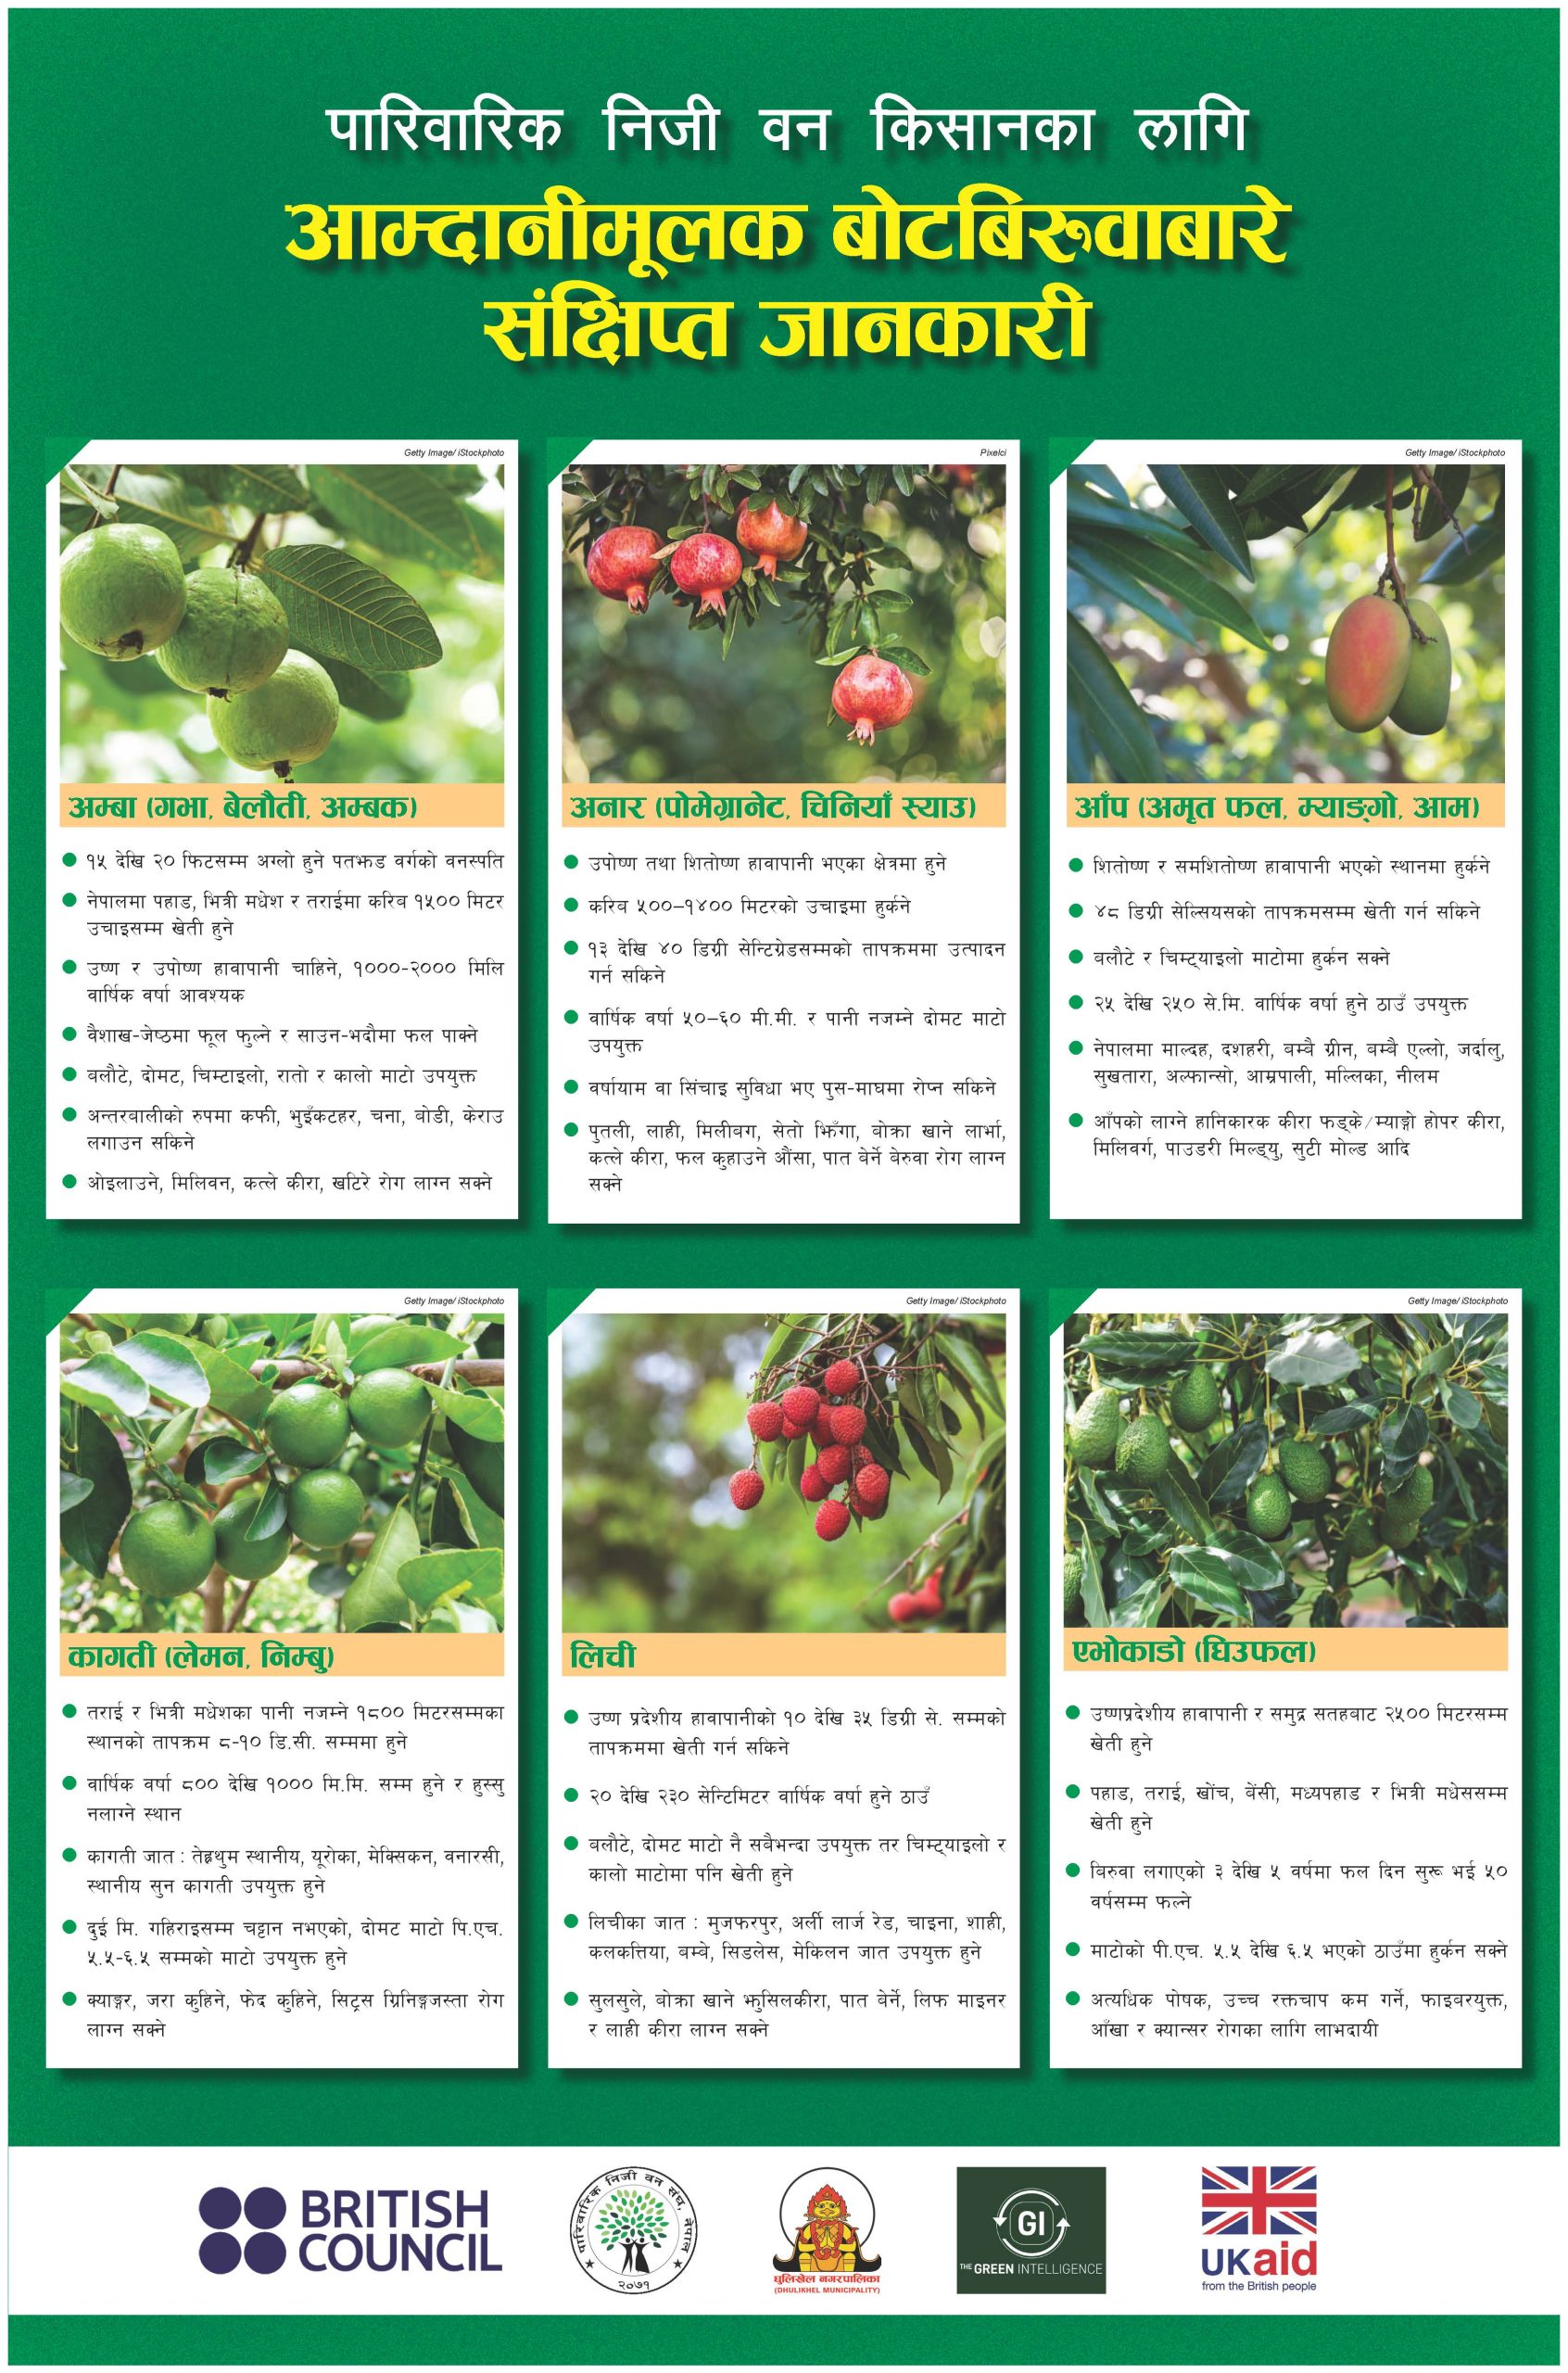 Brief Details of Some High-value Crops